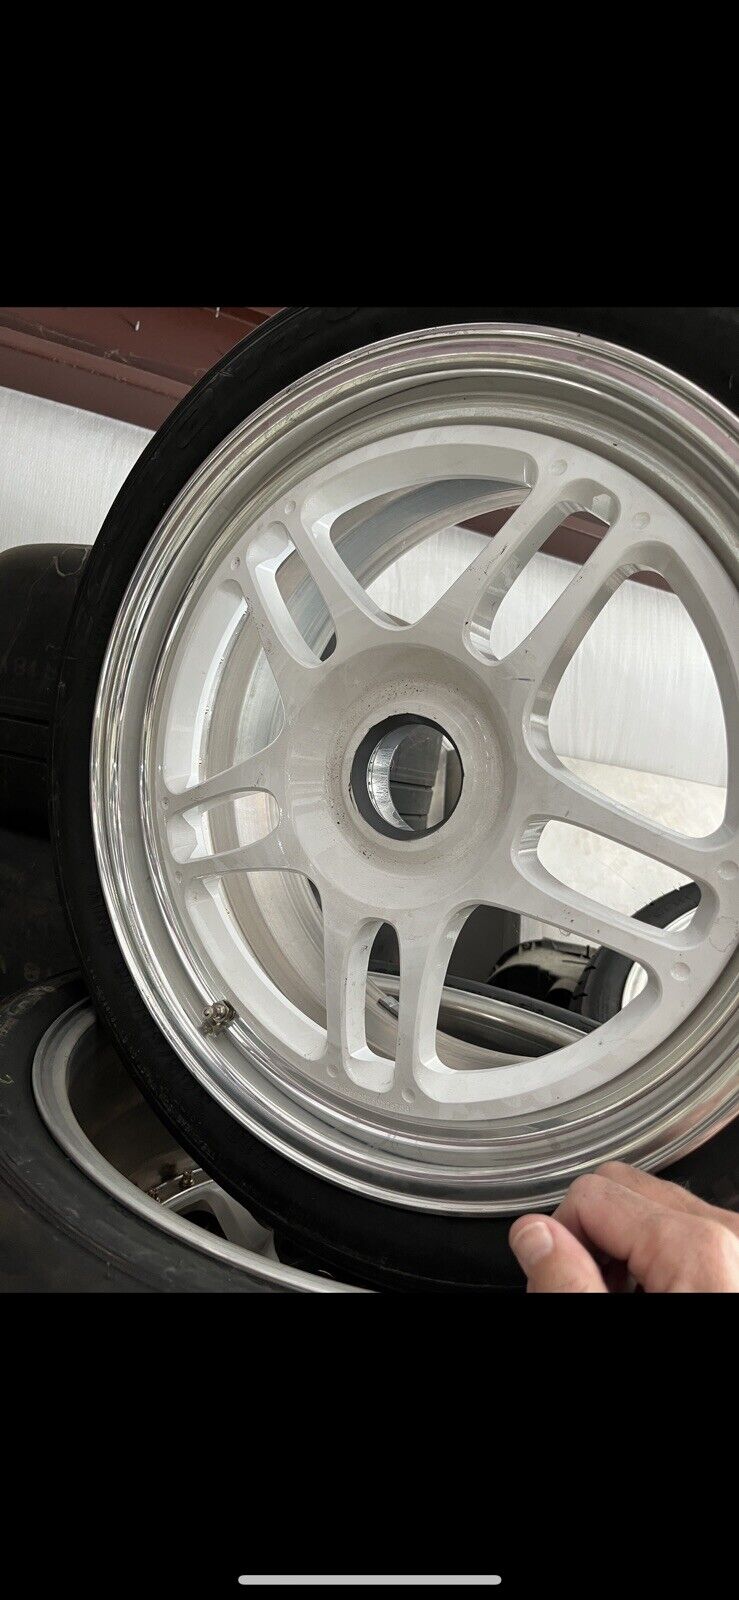 Fikse wheels Built For Superformance Daytona coupe. 18”x8 & 18”x11 For PinDrive